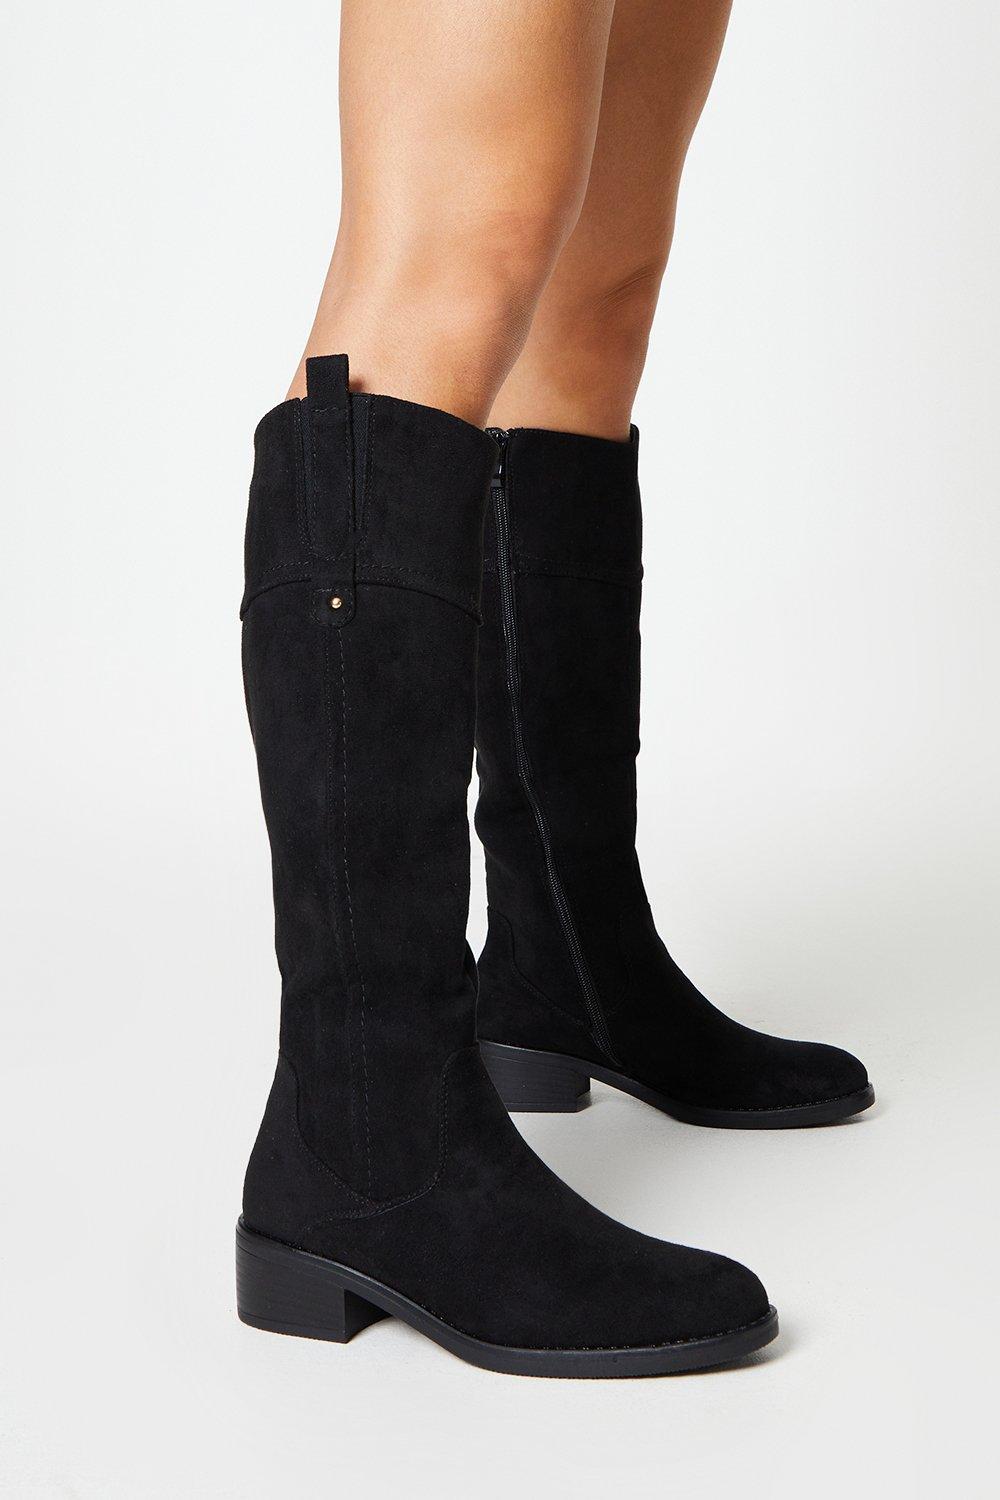 Image of Womens Anais Cruved Top Low Heel Riding Boots